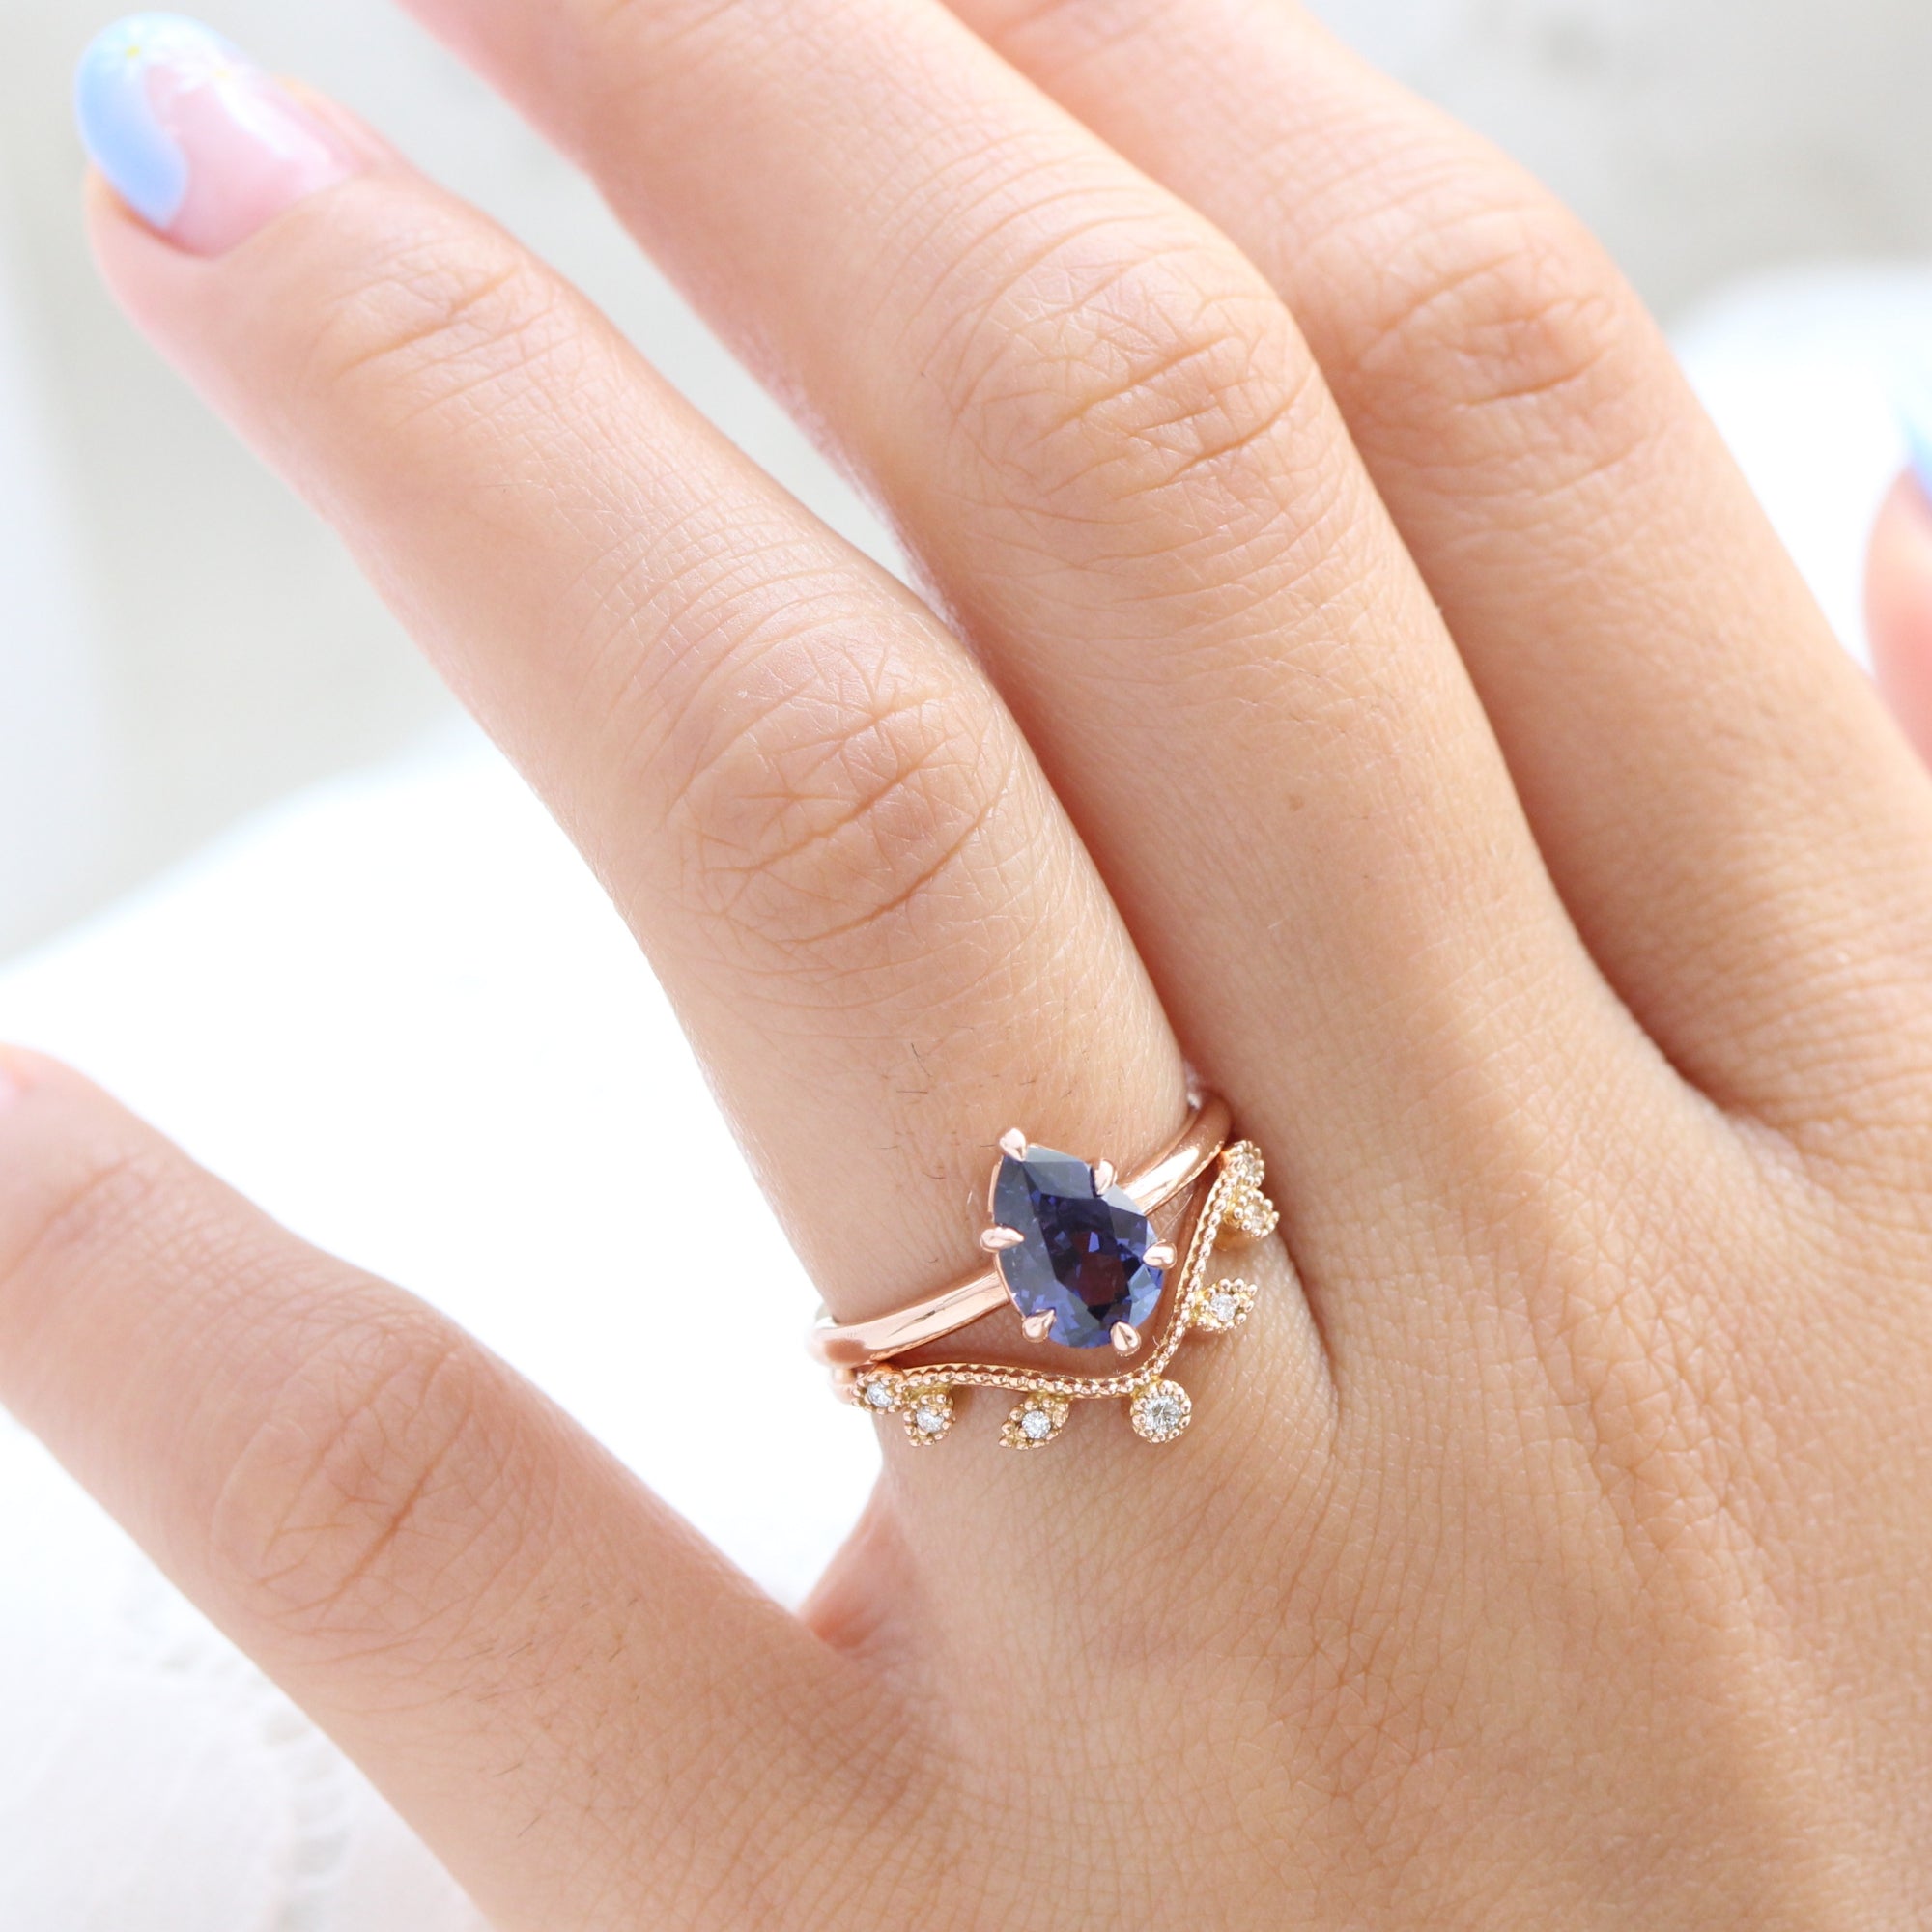 Pear cut purple blue sapphire ring rose gold low setting solitaire engagement ring la more design jewelry